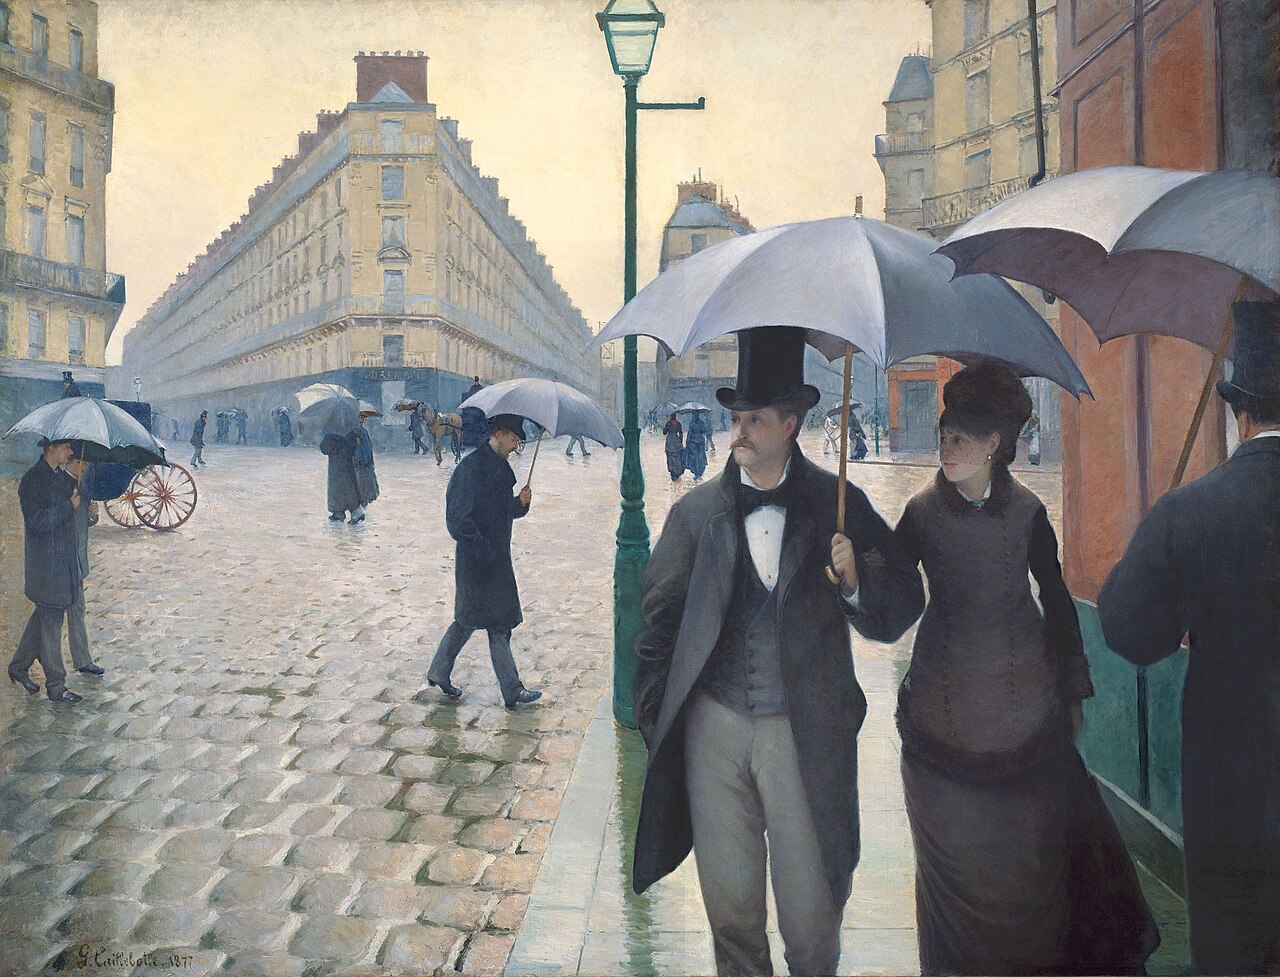 http://upload.wikimedia.org/wikipedia/commons/thumb/d/d4/Gustave_Caillebotte_-_Jour_de_pluie_%C3%A0_Paris.jpg/1280px-Gustave_Caillebotte_-_Jour_de_pluie_%C3%A0_Paris.jpg